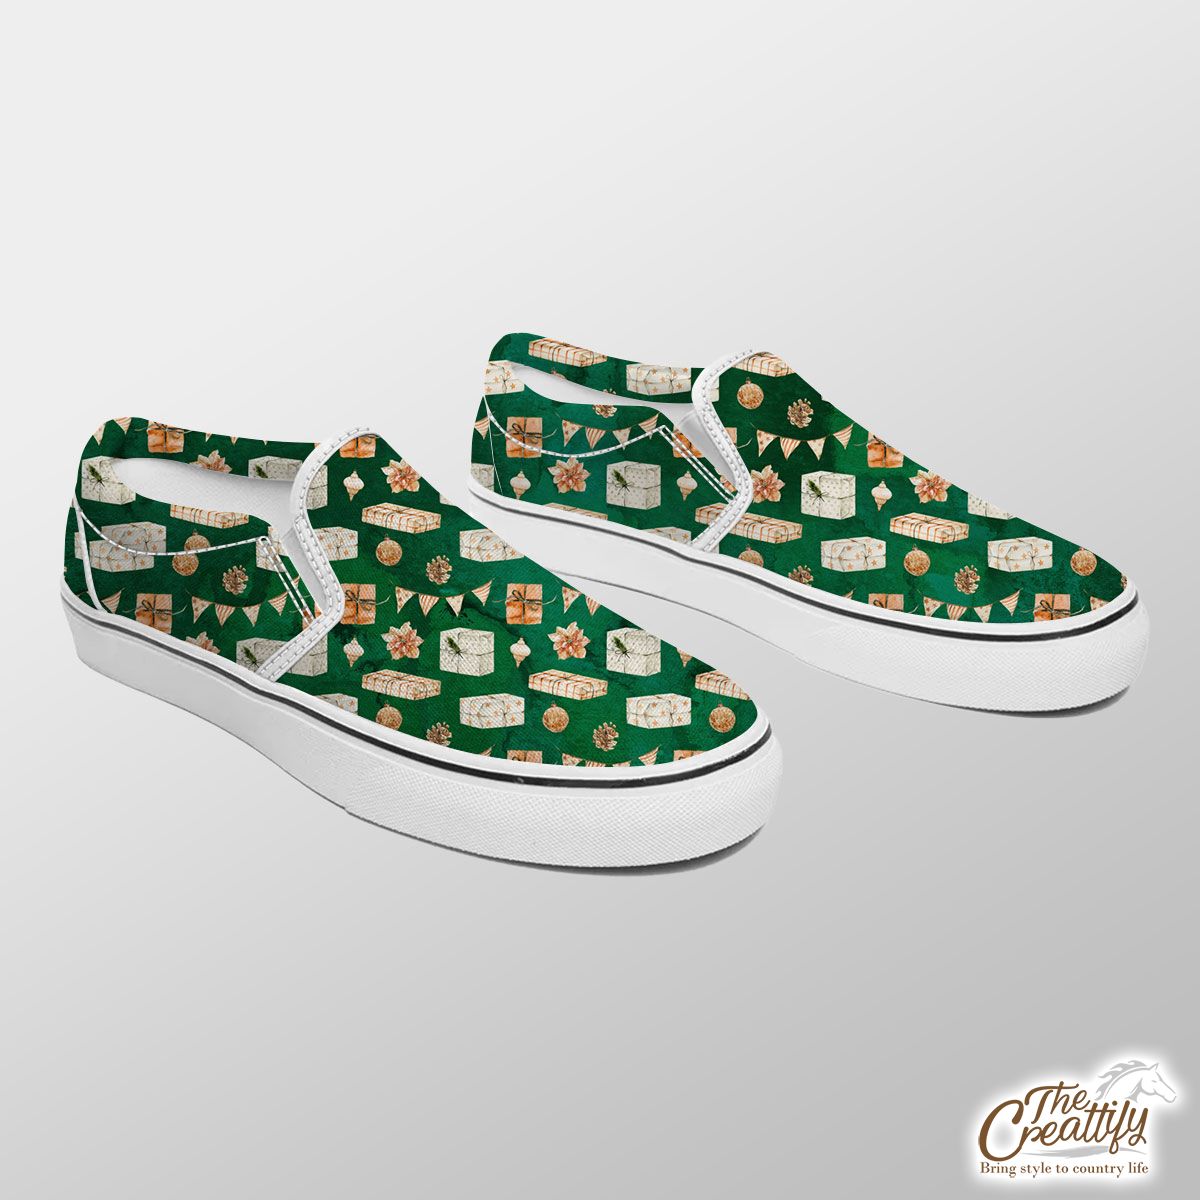 Pine Cone, Christmas Gifts With Flags Pattern Slip On Sneakers